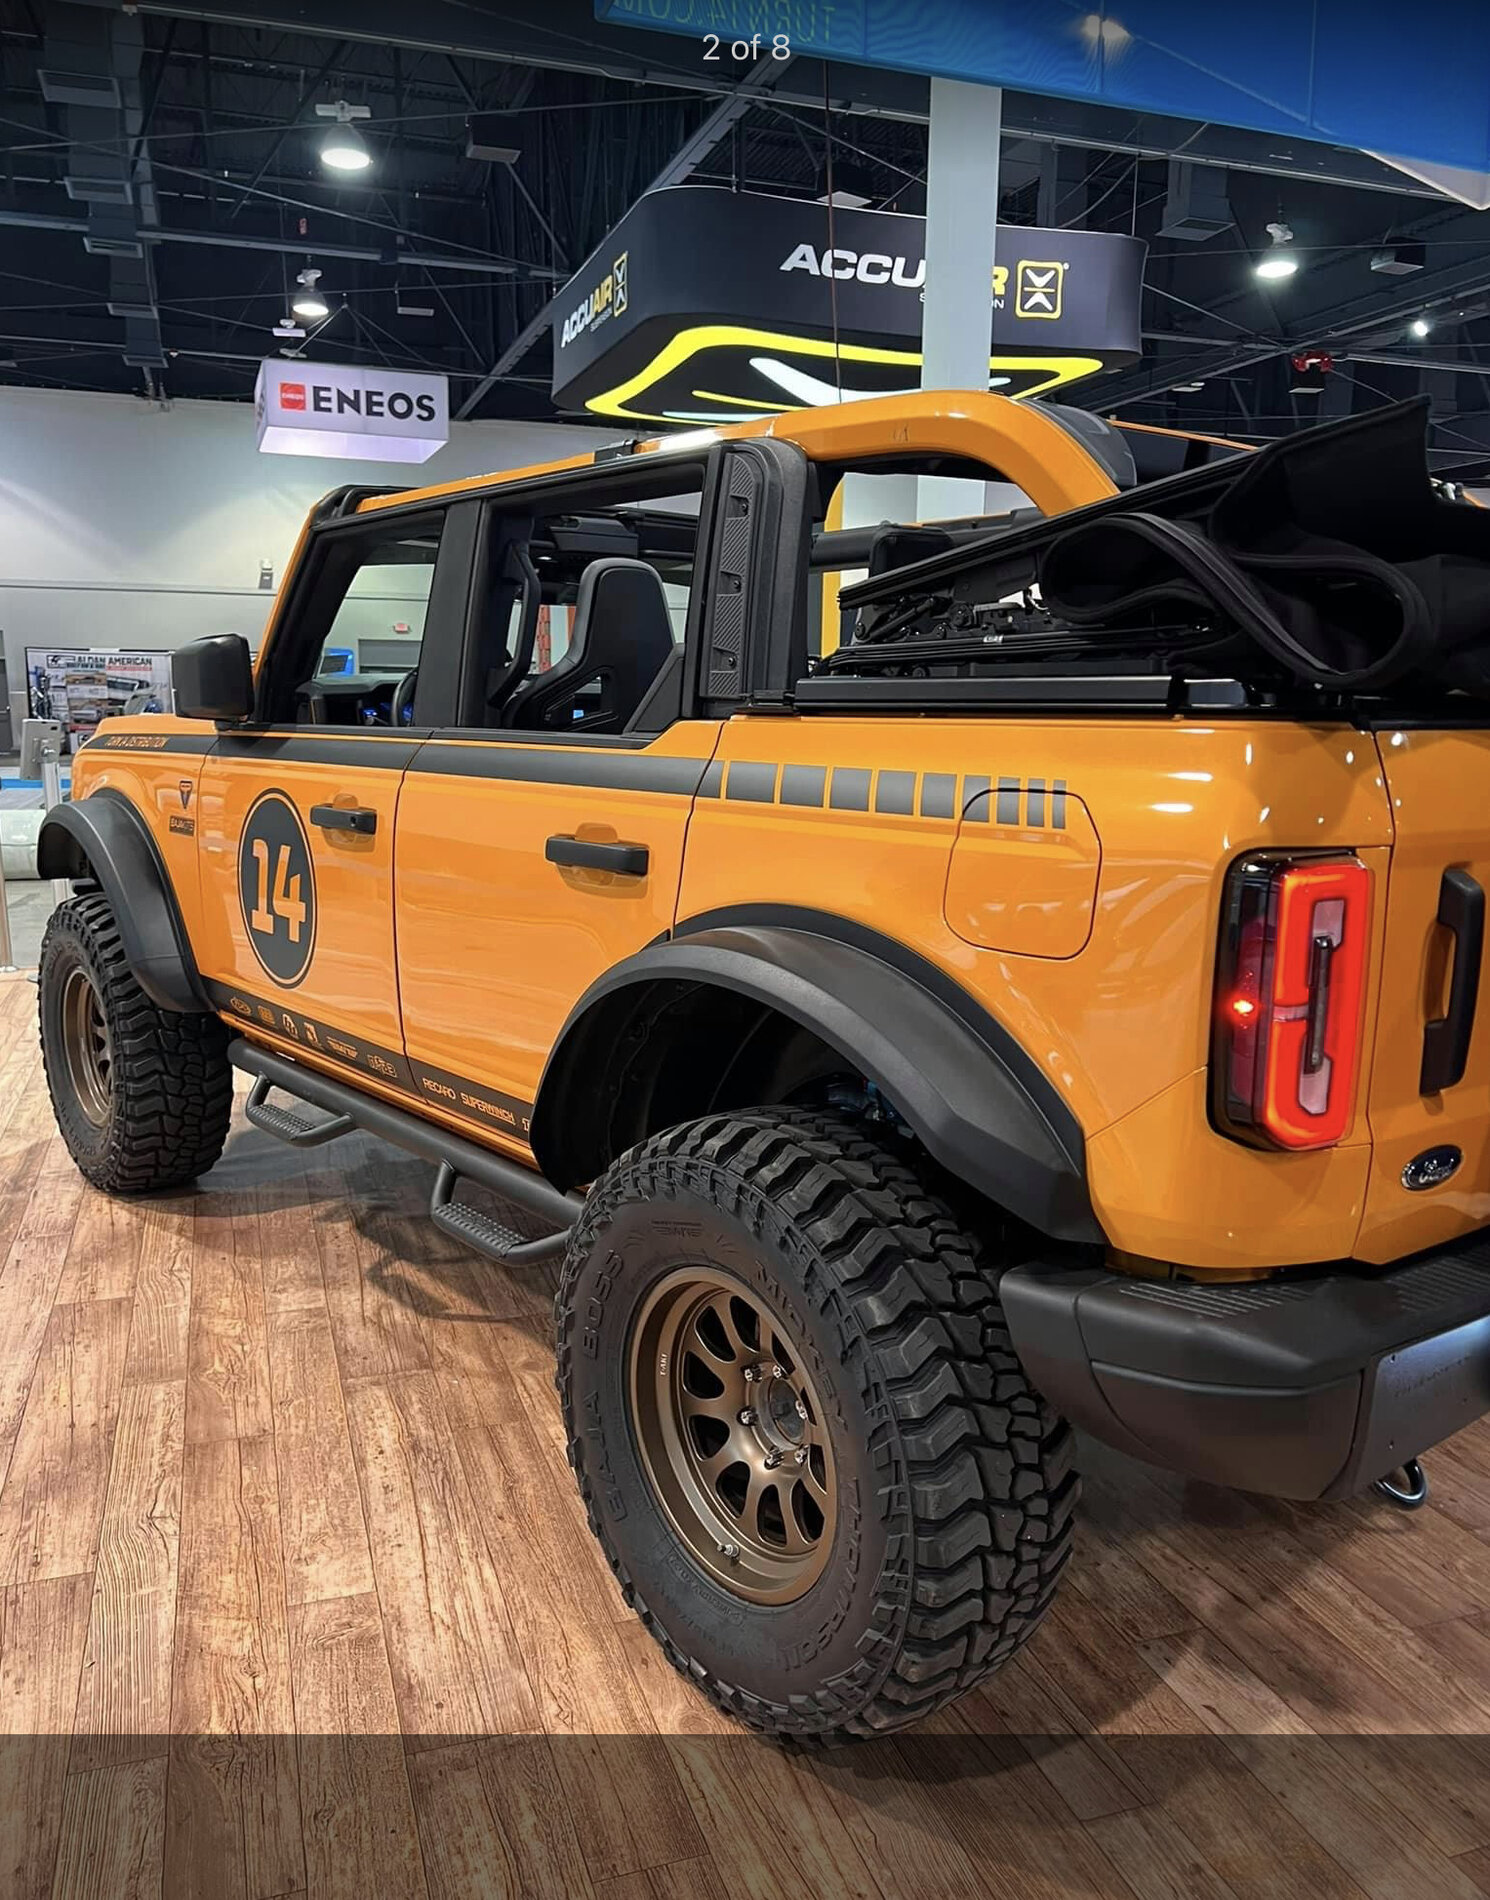 Ford Bronco Pics of (almost) all the SEMA Broncos In One Thread EC2D3EA6-2563-4F3A-9970-CFBD65637563